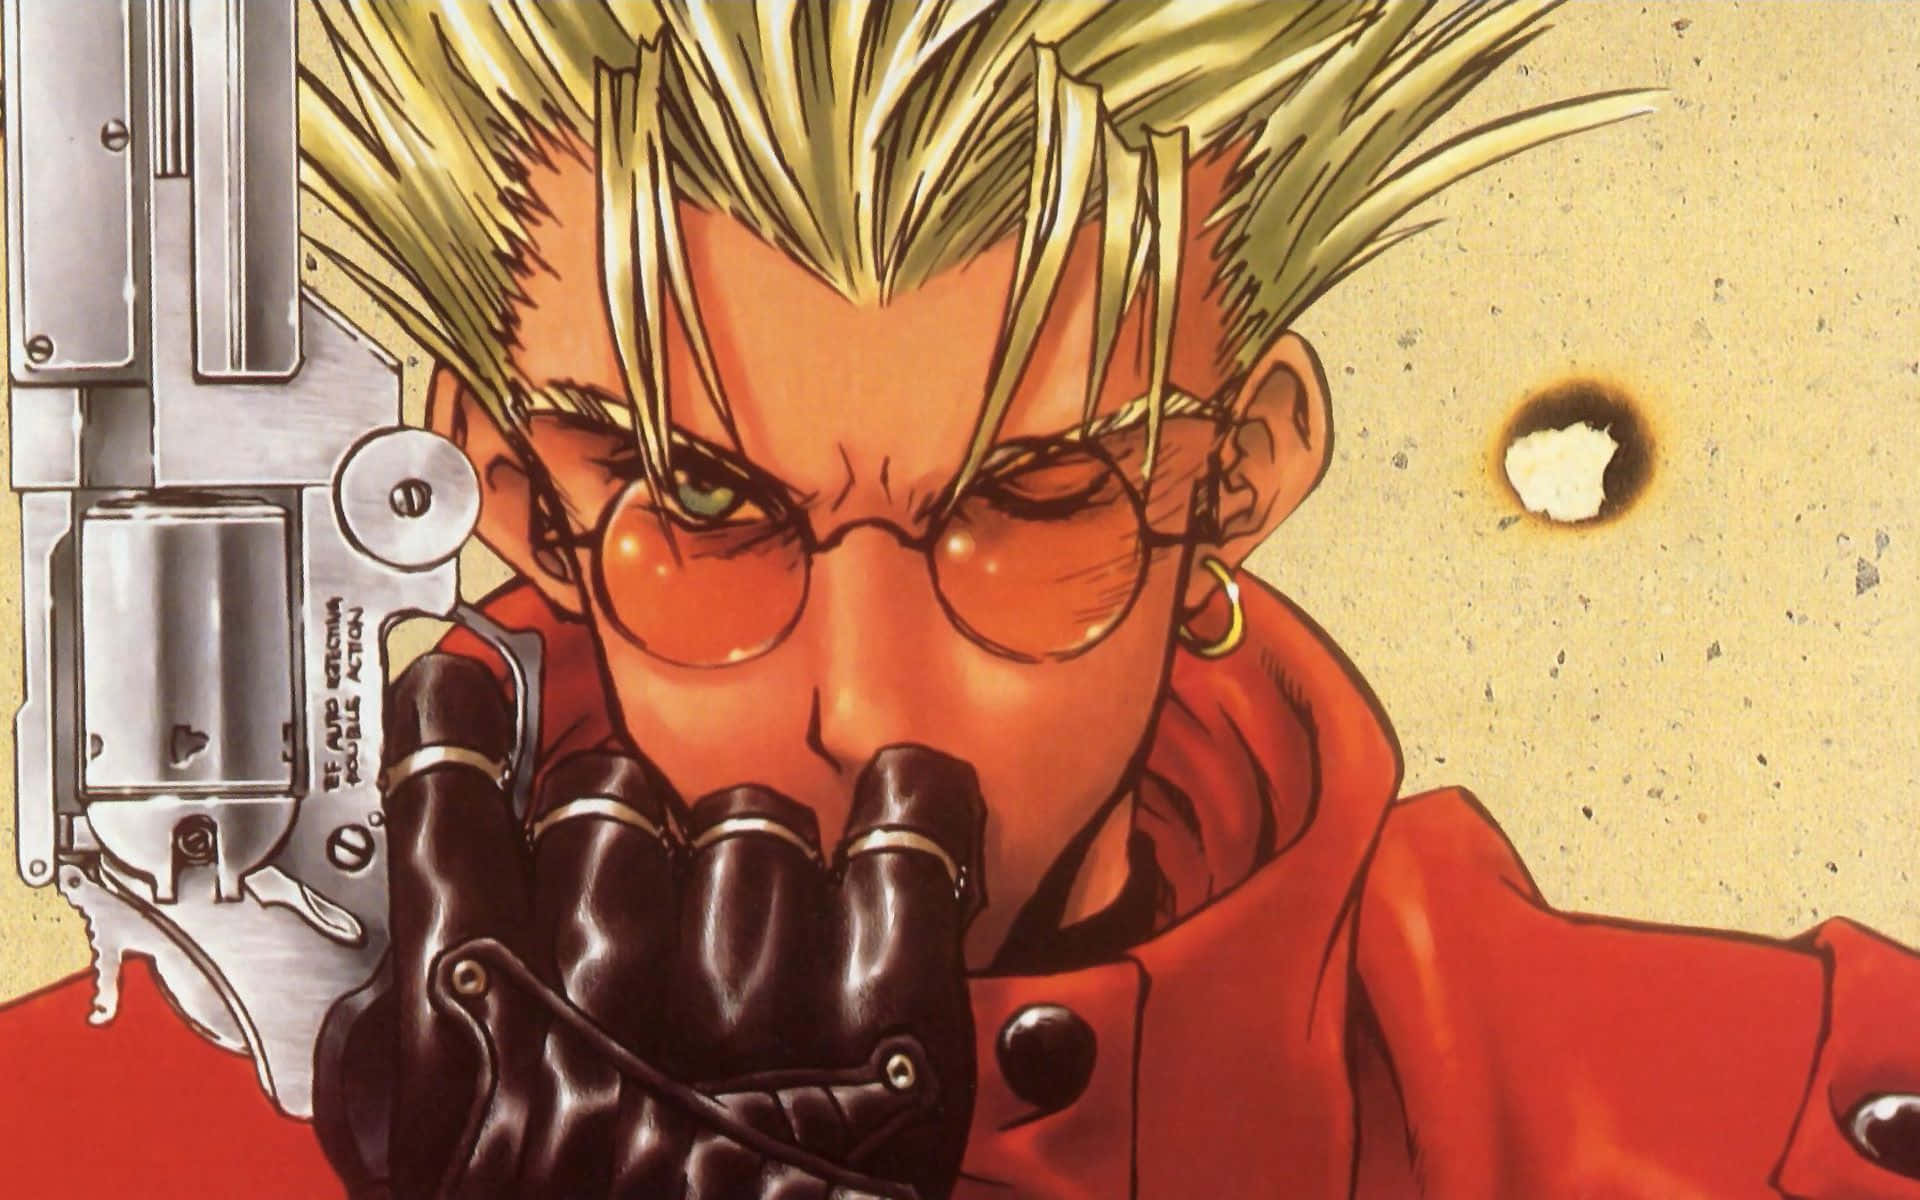 A Shot of 'Vash The Stampede' From 'Trigun'